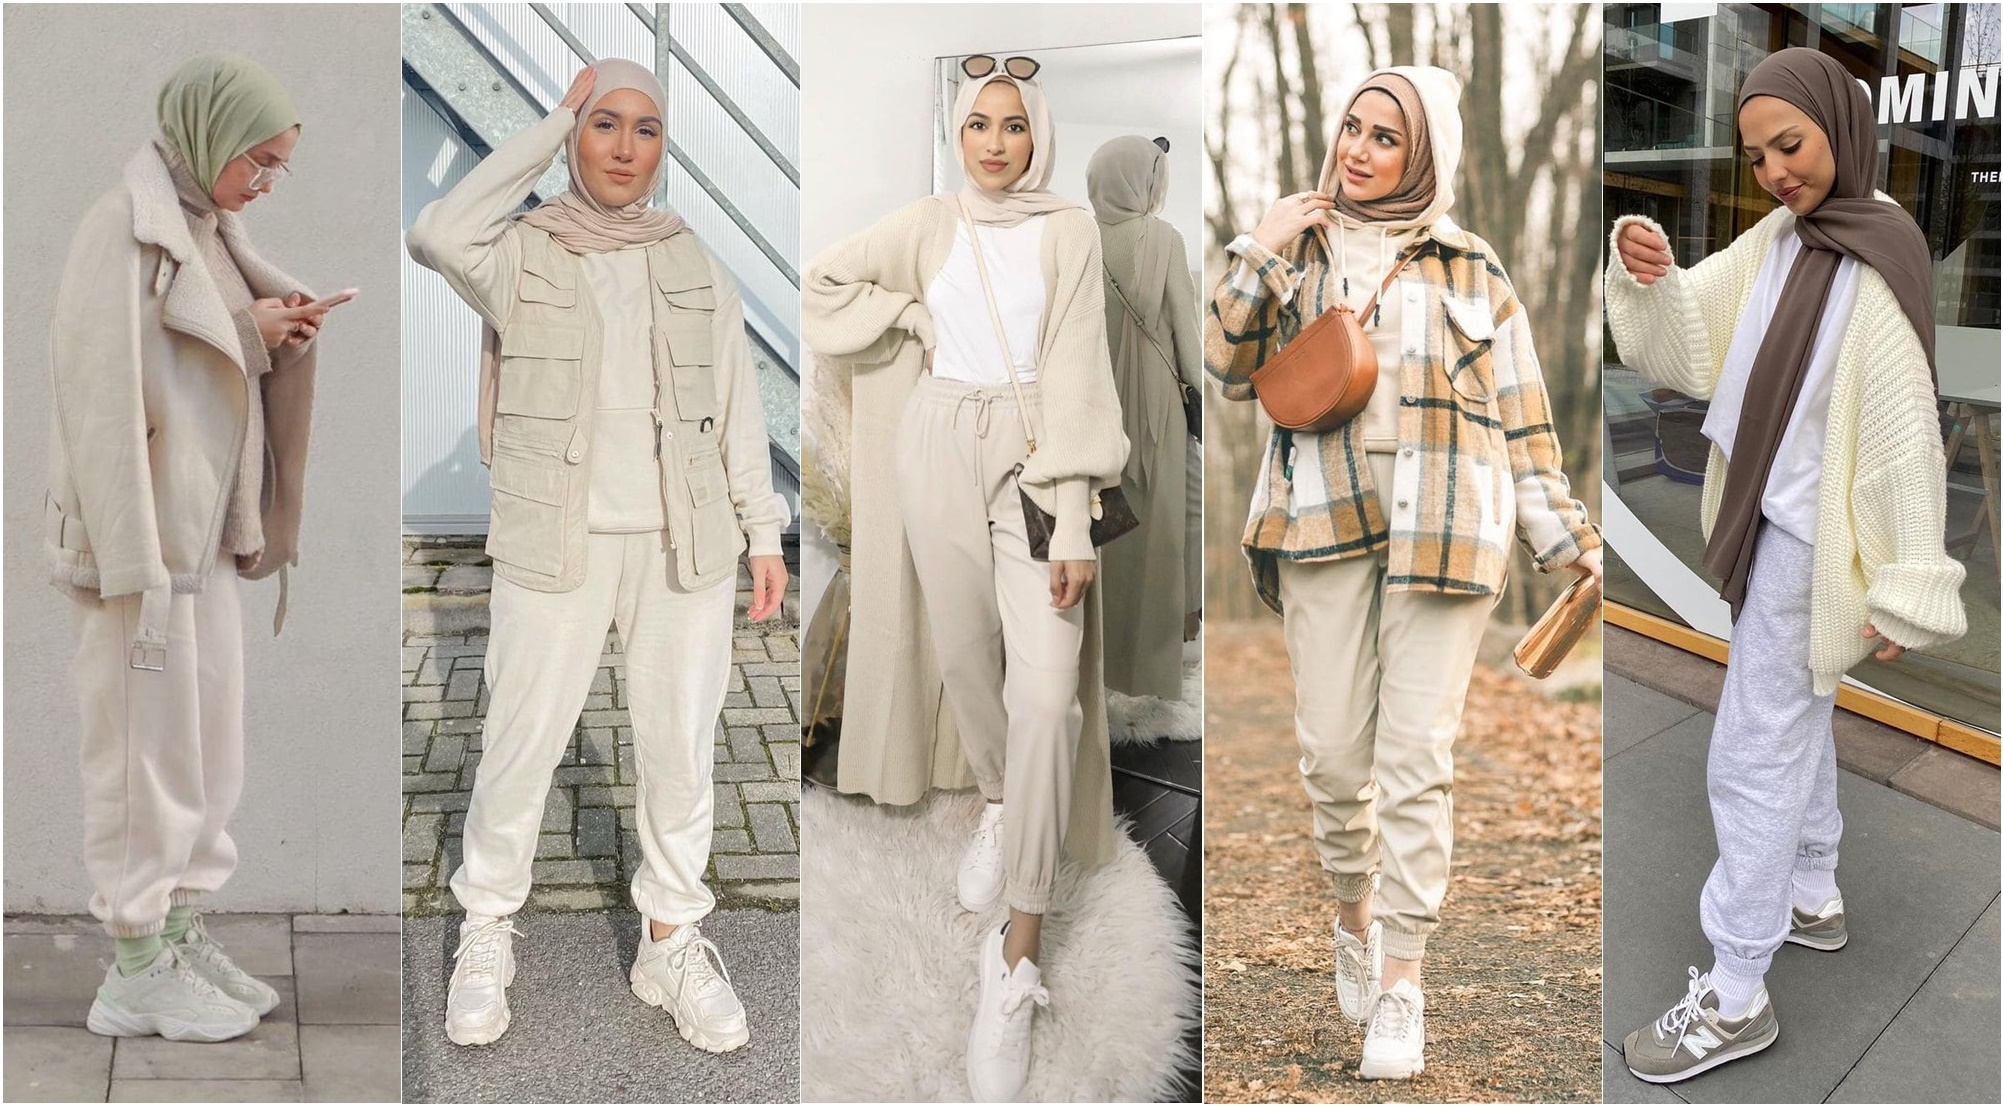 How To Style Jogging pants For Everyday Outfits - Hijab Fashion Inspiration